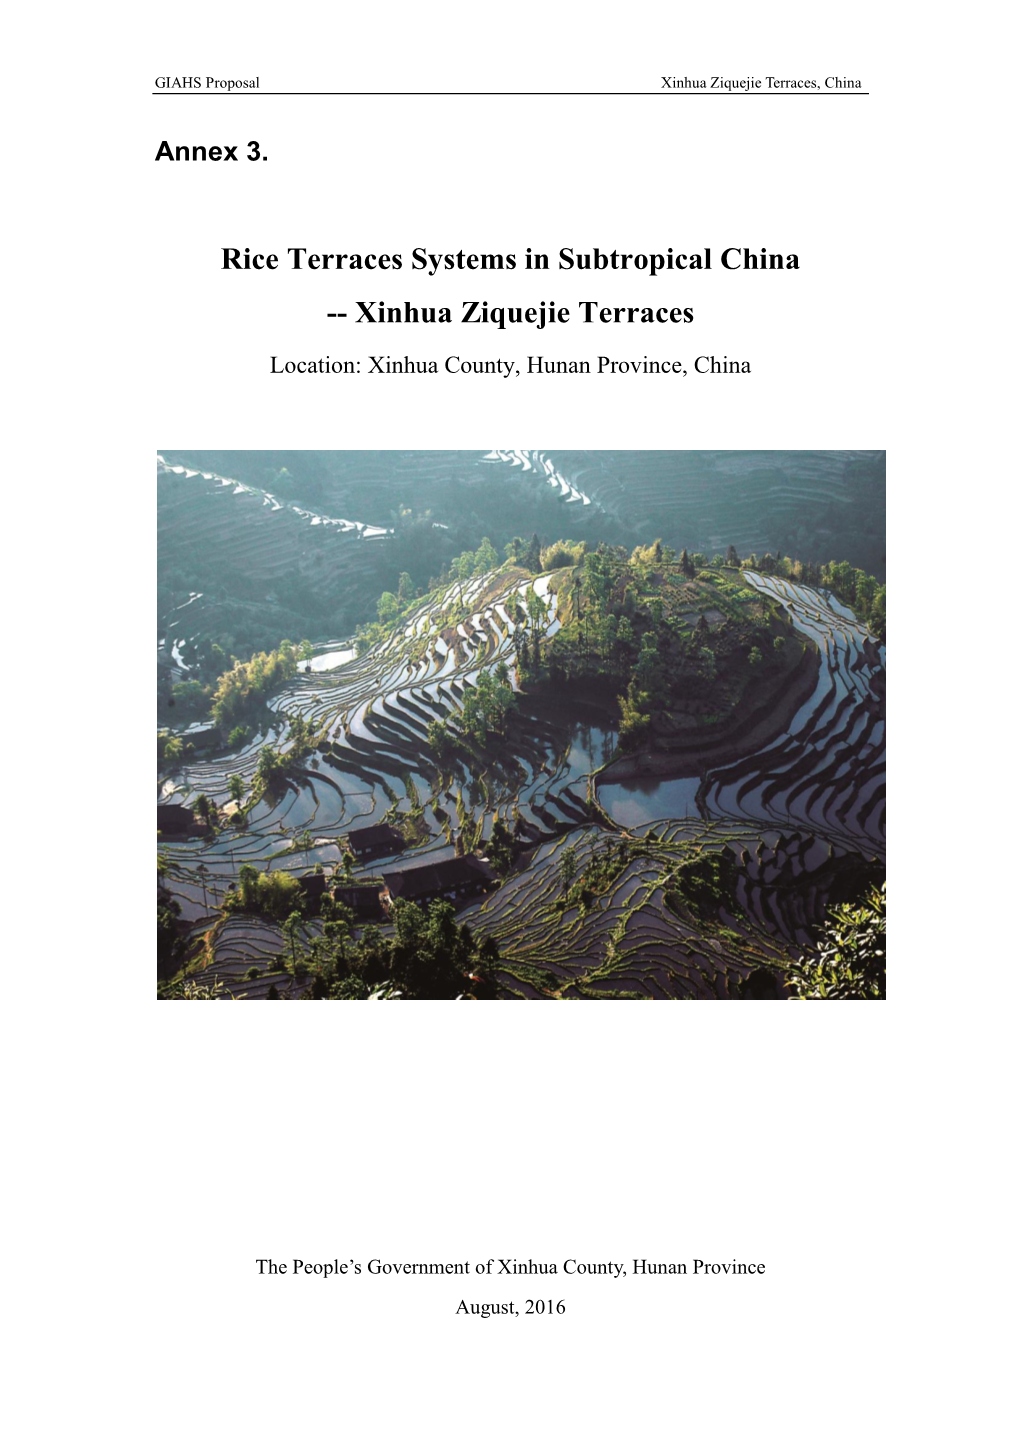 Rice Terraces Systems in Subtropical China -- Xinhua Ziquejie Terraces